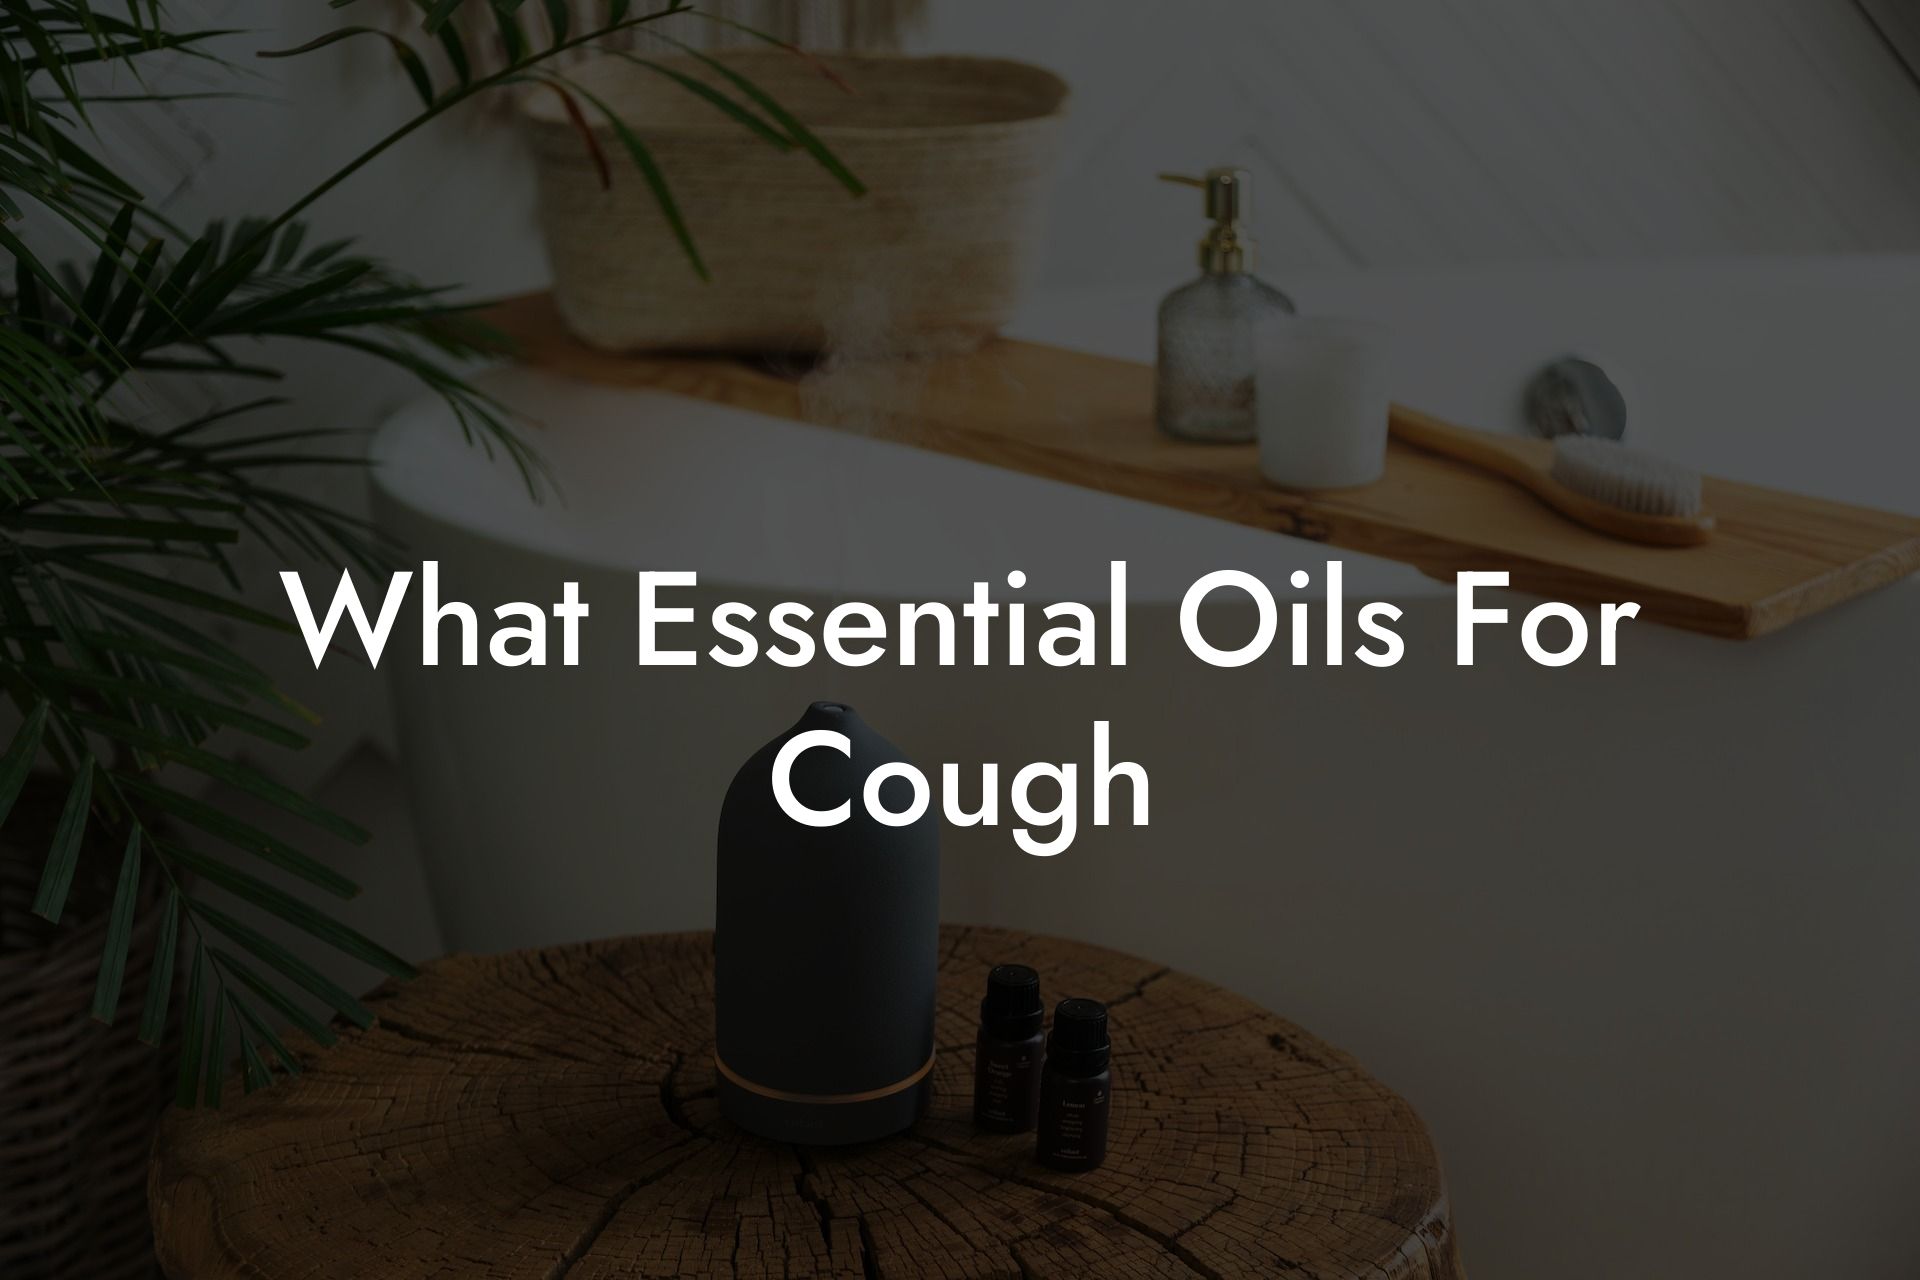 What Essential Oils For Cough